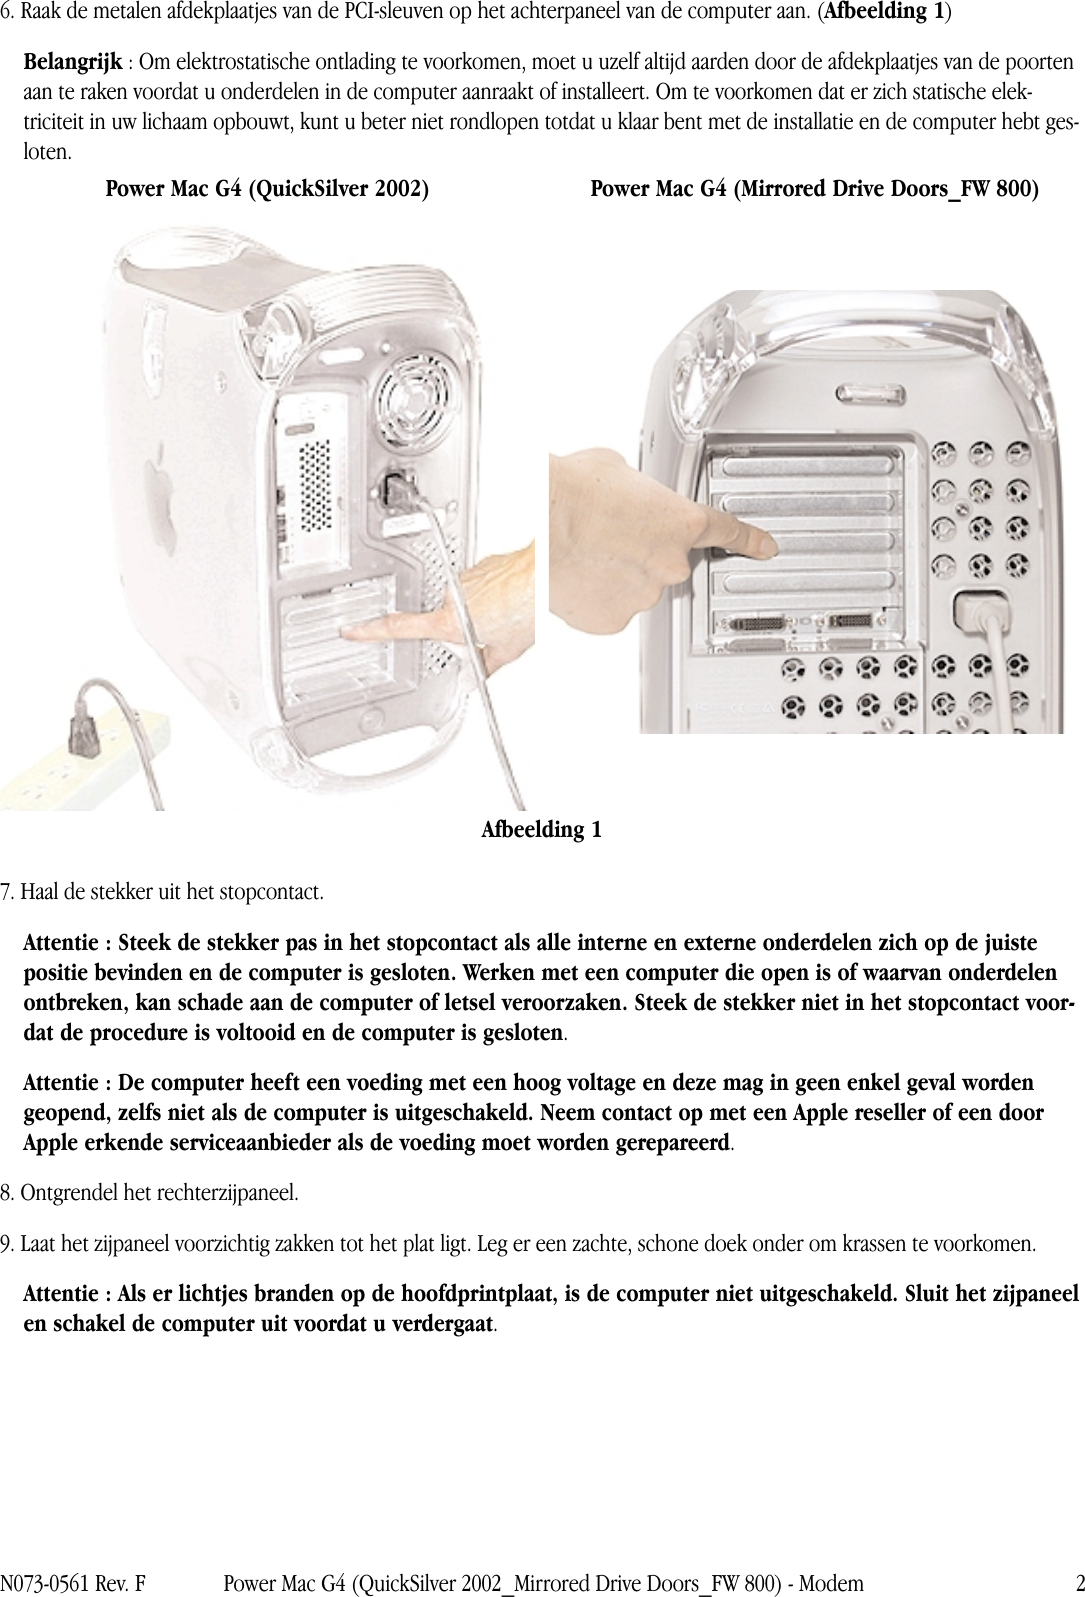 Page 2 of 4 - Apple Power Mac G4 (QuickSilver 2002) Modem User Manual (Quick Silver 2002, Mirrored Drive Doors, Fire Wire 800) - Instructies Voor Vervanging G4mdd-fw800-modem